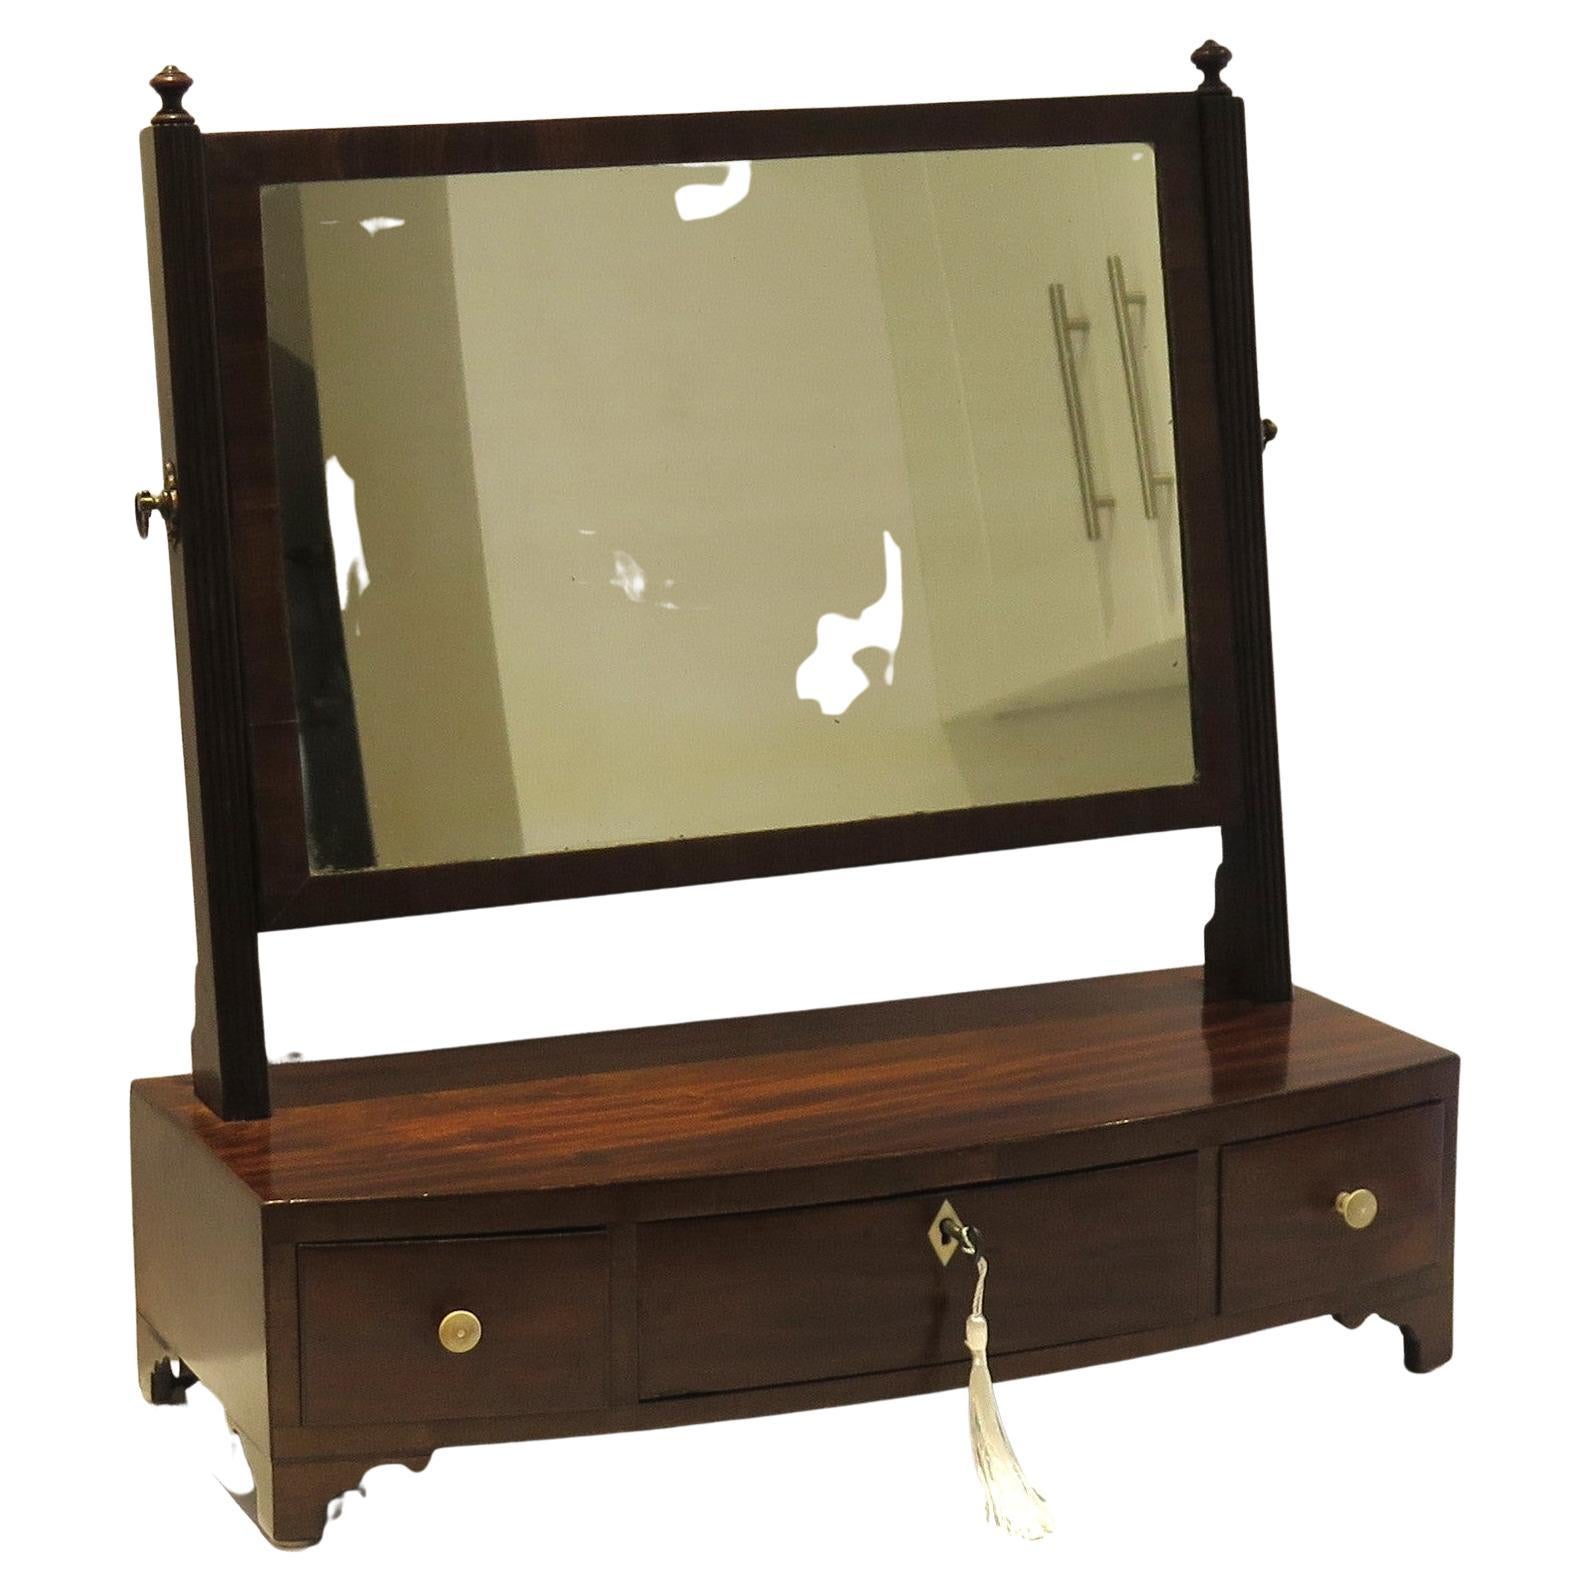 This is a fine quality English Sheraton period antique Toilet Mirror, dating to the late 18th century, late Georgian period, circa 1810.

The mirror is well constructed with many fine features;
 1) Bow fronted on bracket feet, with ivory